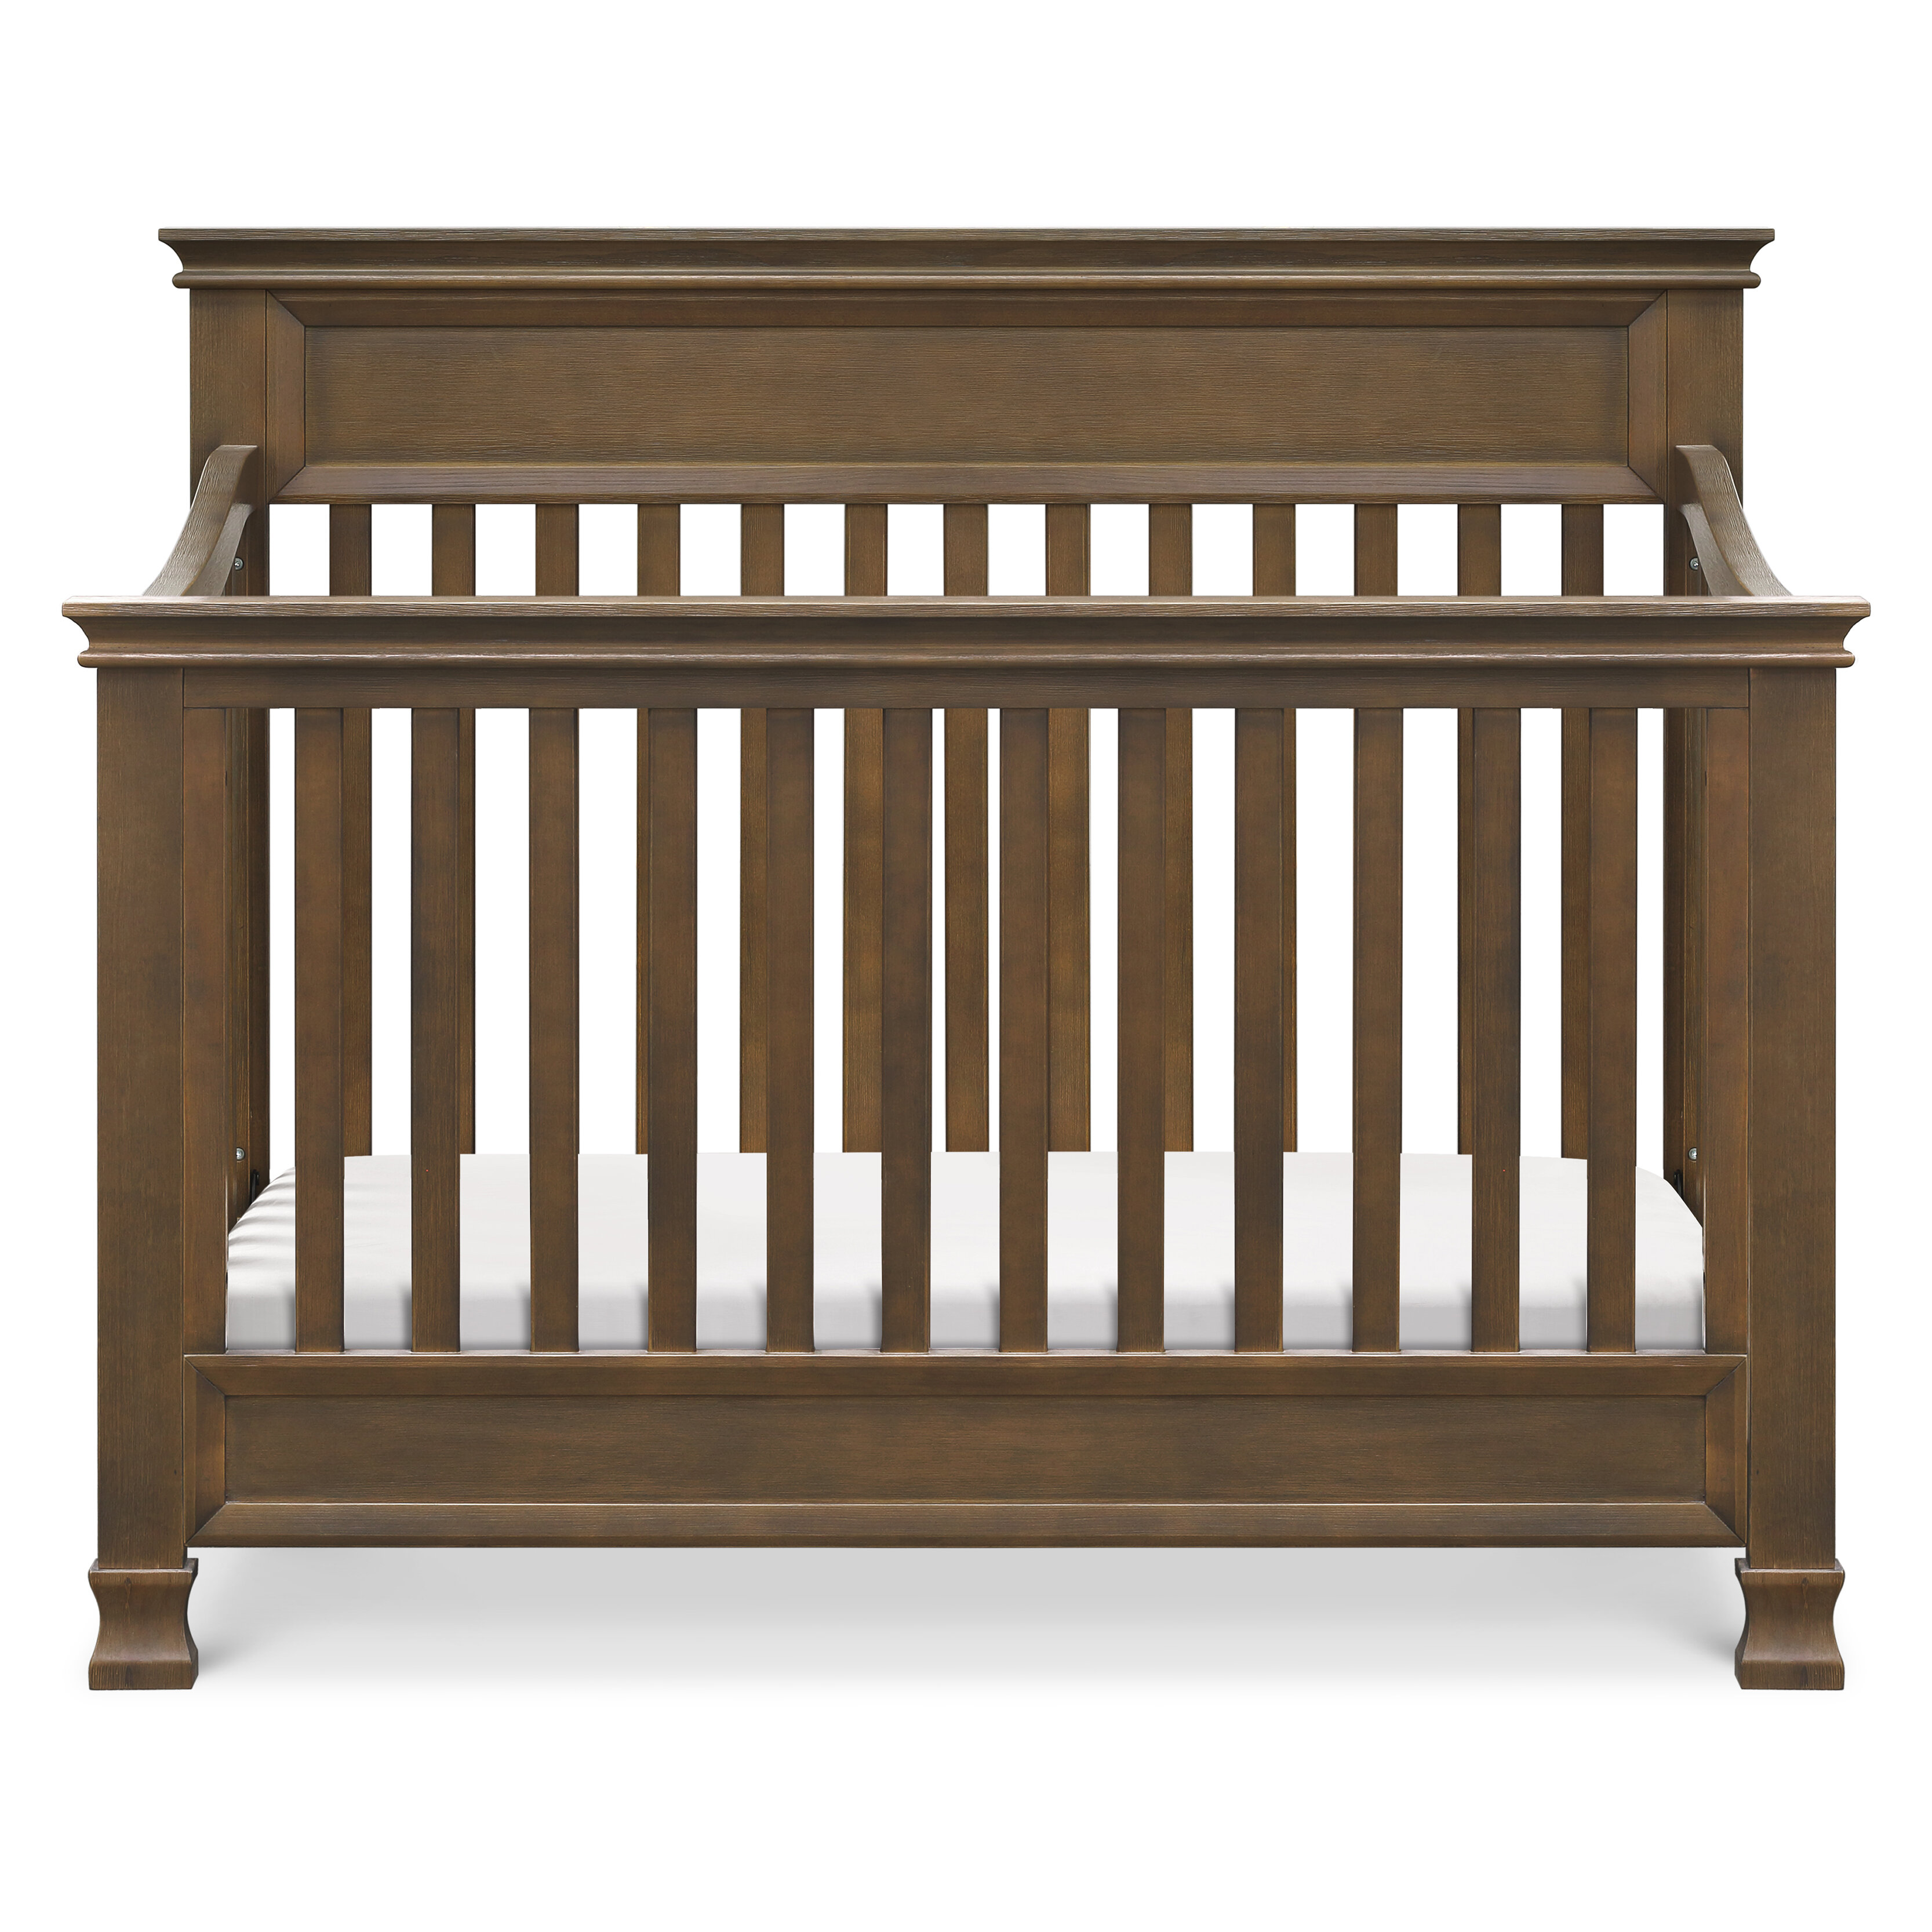 Million Dollar Baby Classic Foothill 4 In 1 Convertible Crib